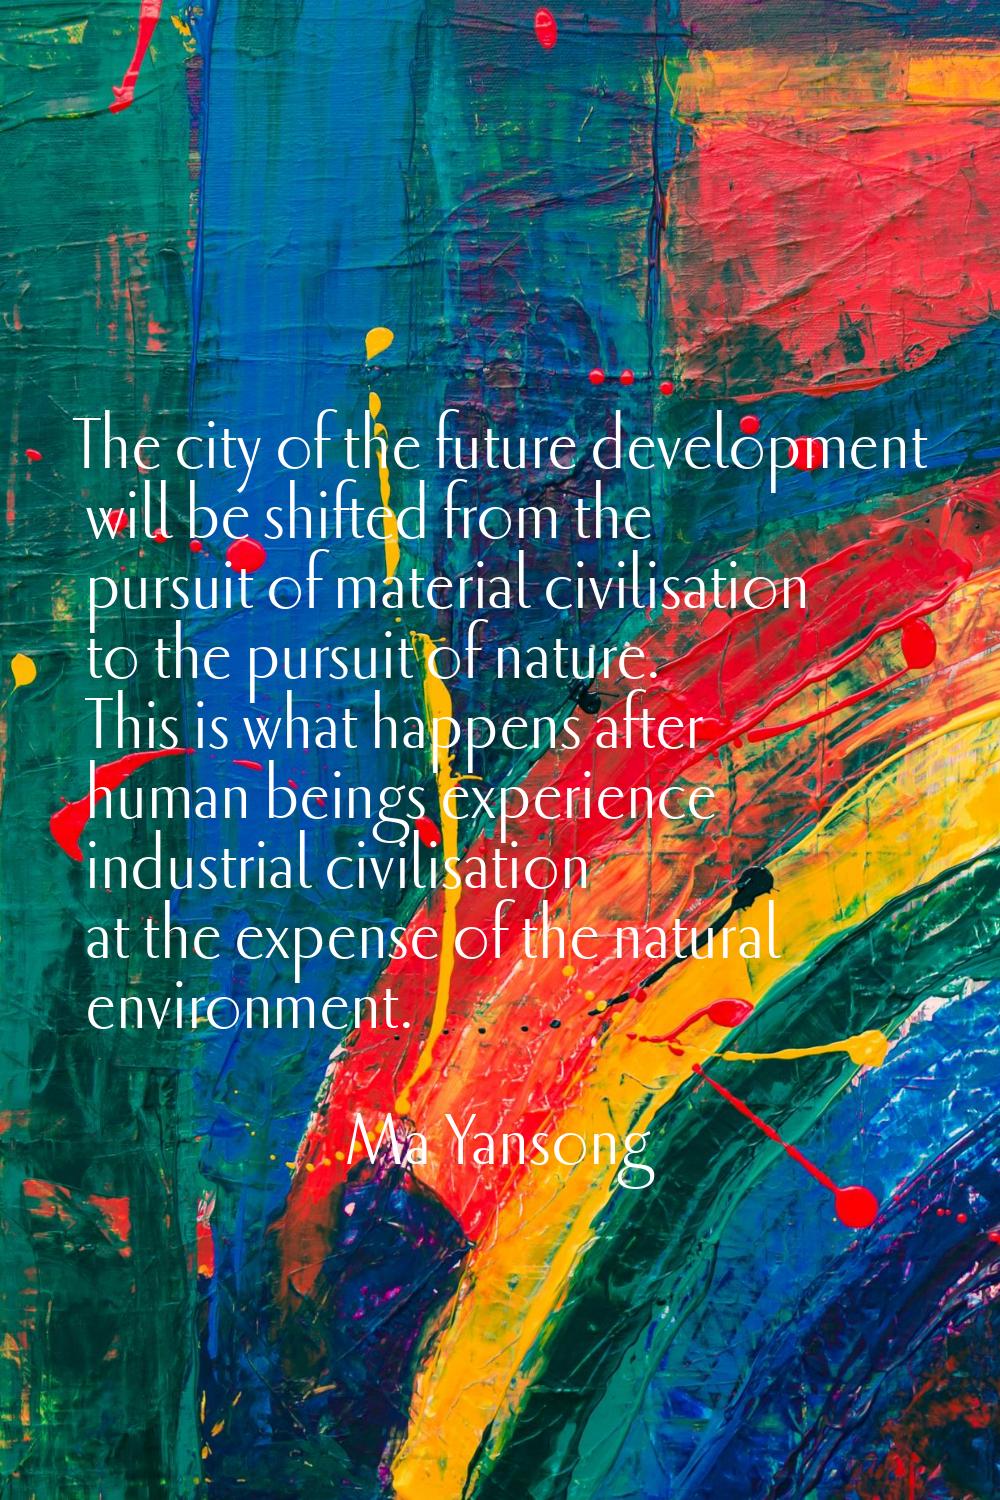 The city of the future development will be shifted from the pursuit of material civilisation to the